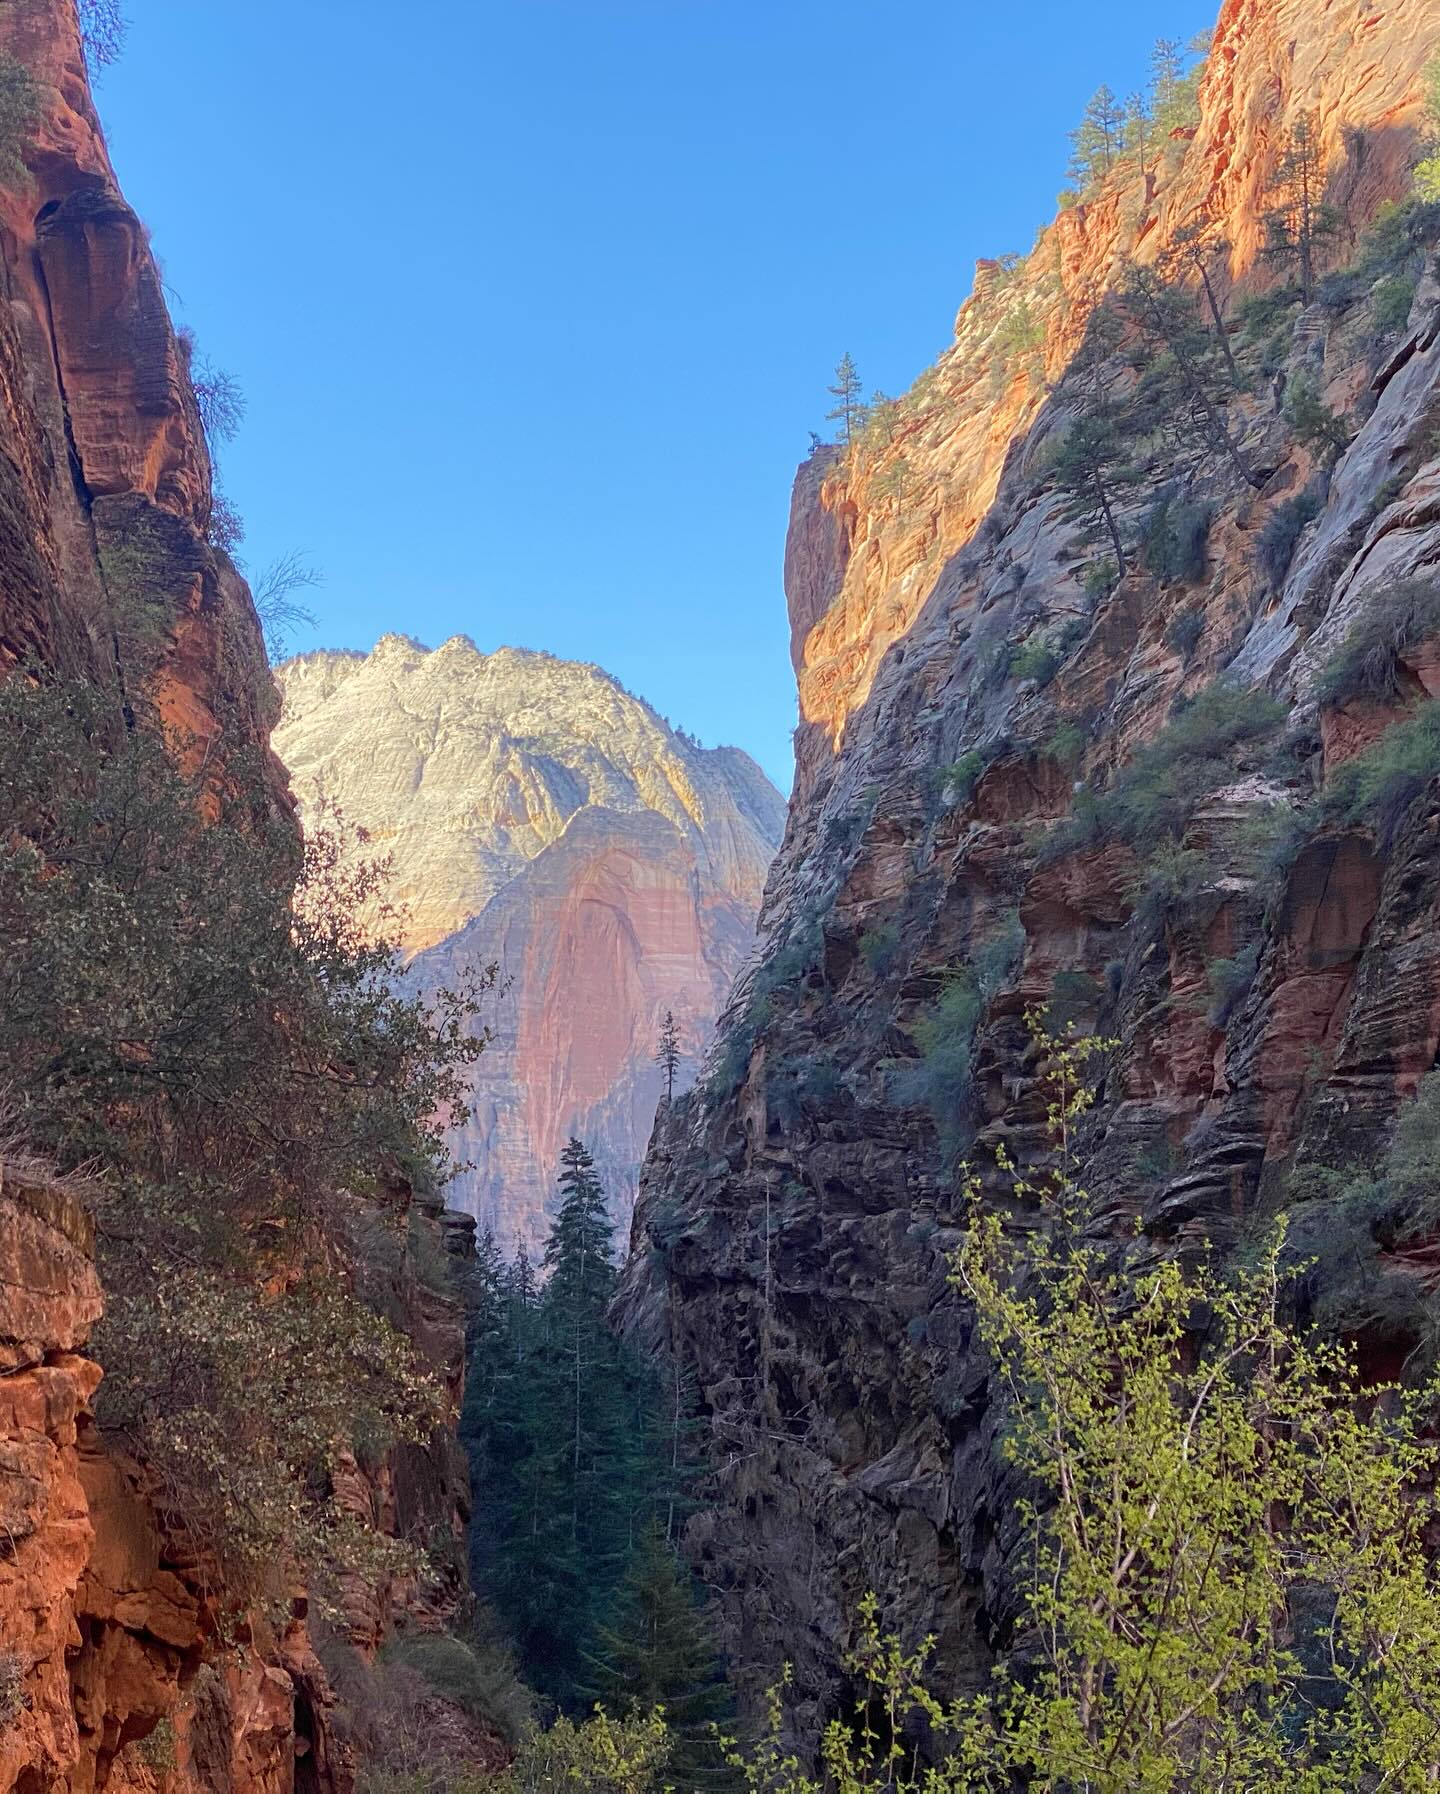 Day 1 of the Zion of Fitness Retreat ⛰️ 
Angels Landings & West Rim Trail

#teamquinnfit #zion #hiking